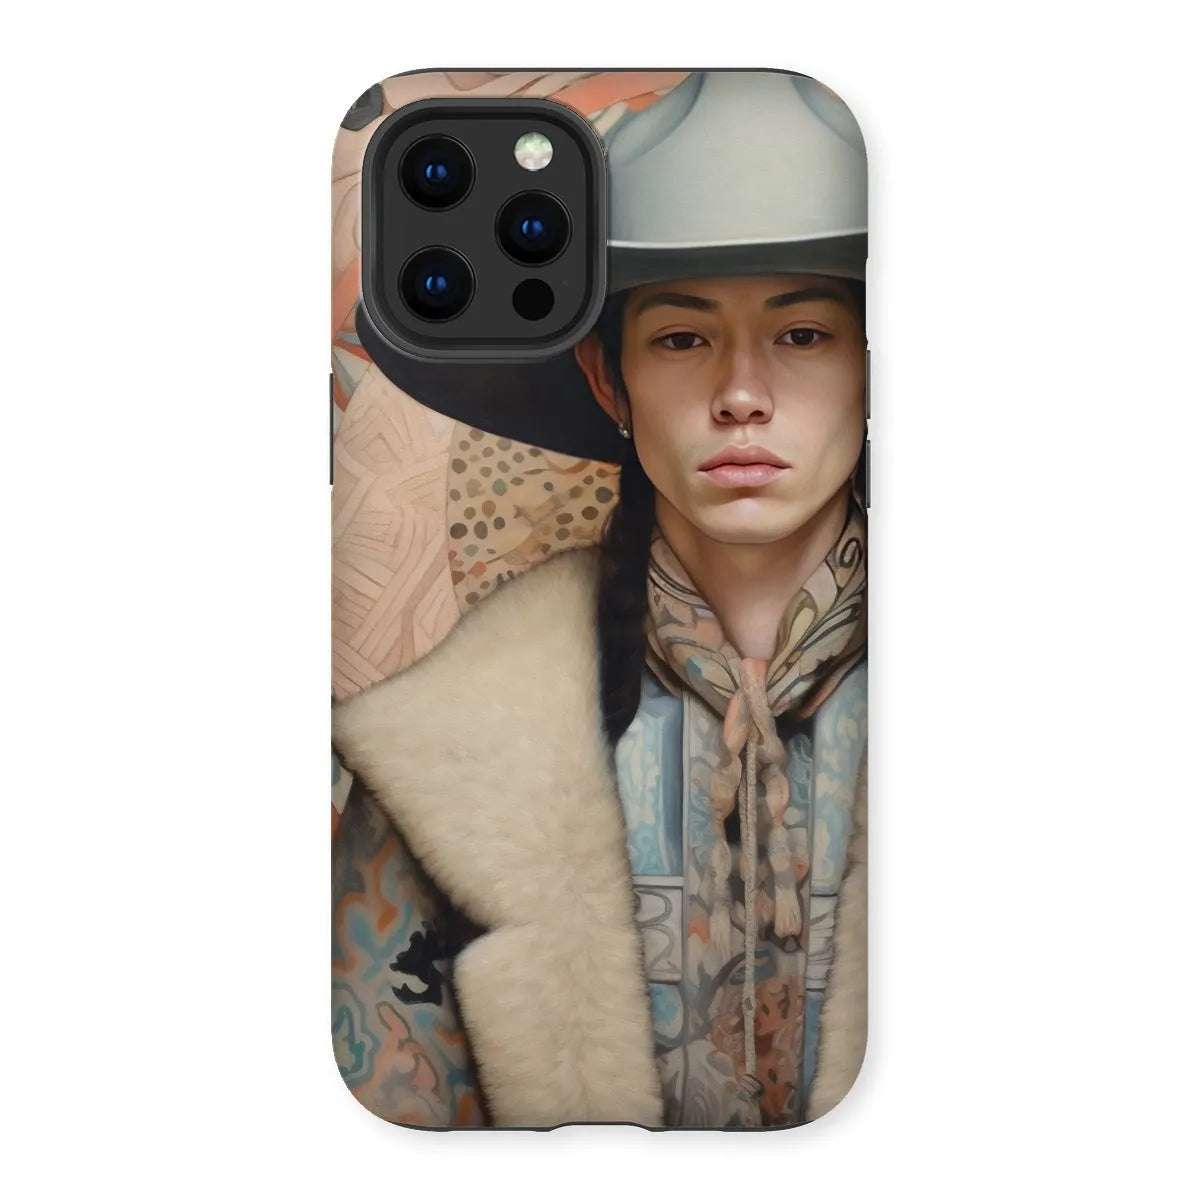 Jacy The Gay Cowboy - Dandy Gay Aesthetic Art Phone Case - Iphone 12 Pro Max / Matte - Mobile Phone Cases - Aesthetic